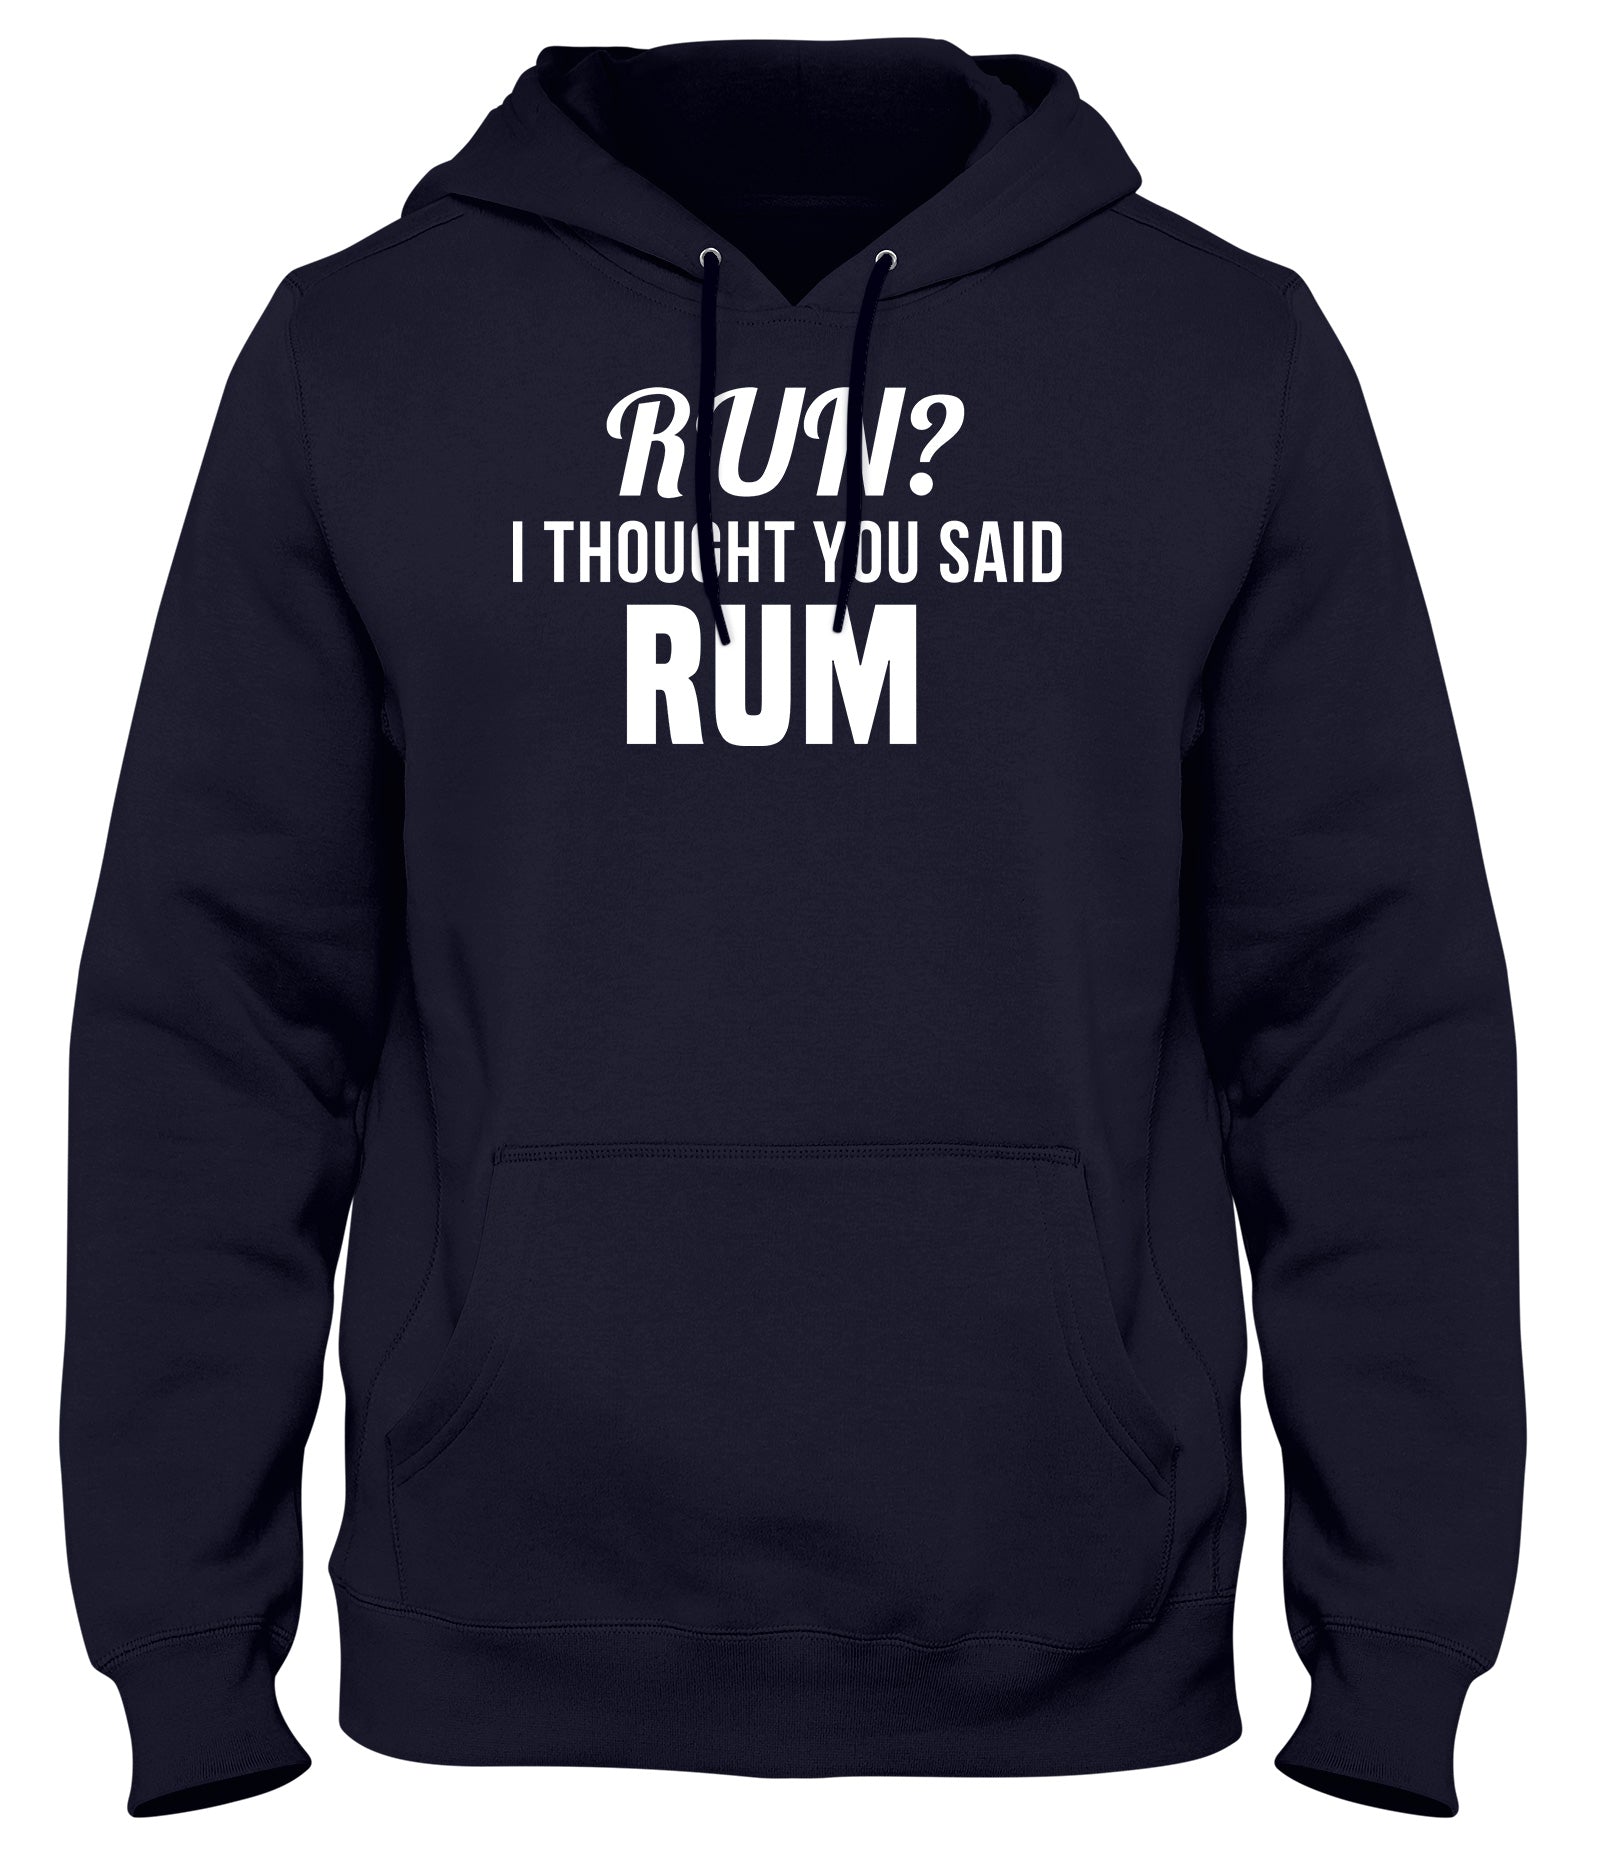 RUN? I THOUGHT YOU SAID RUM MENS WOMENS UNISEX FUNNY HOODIE